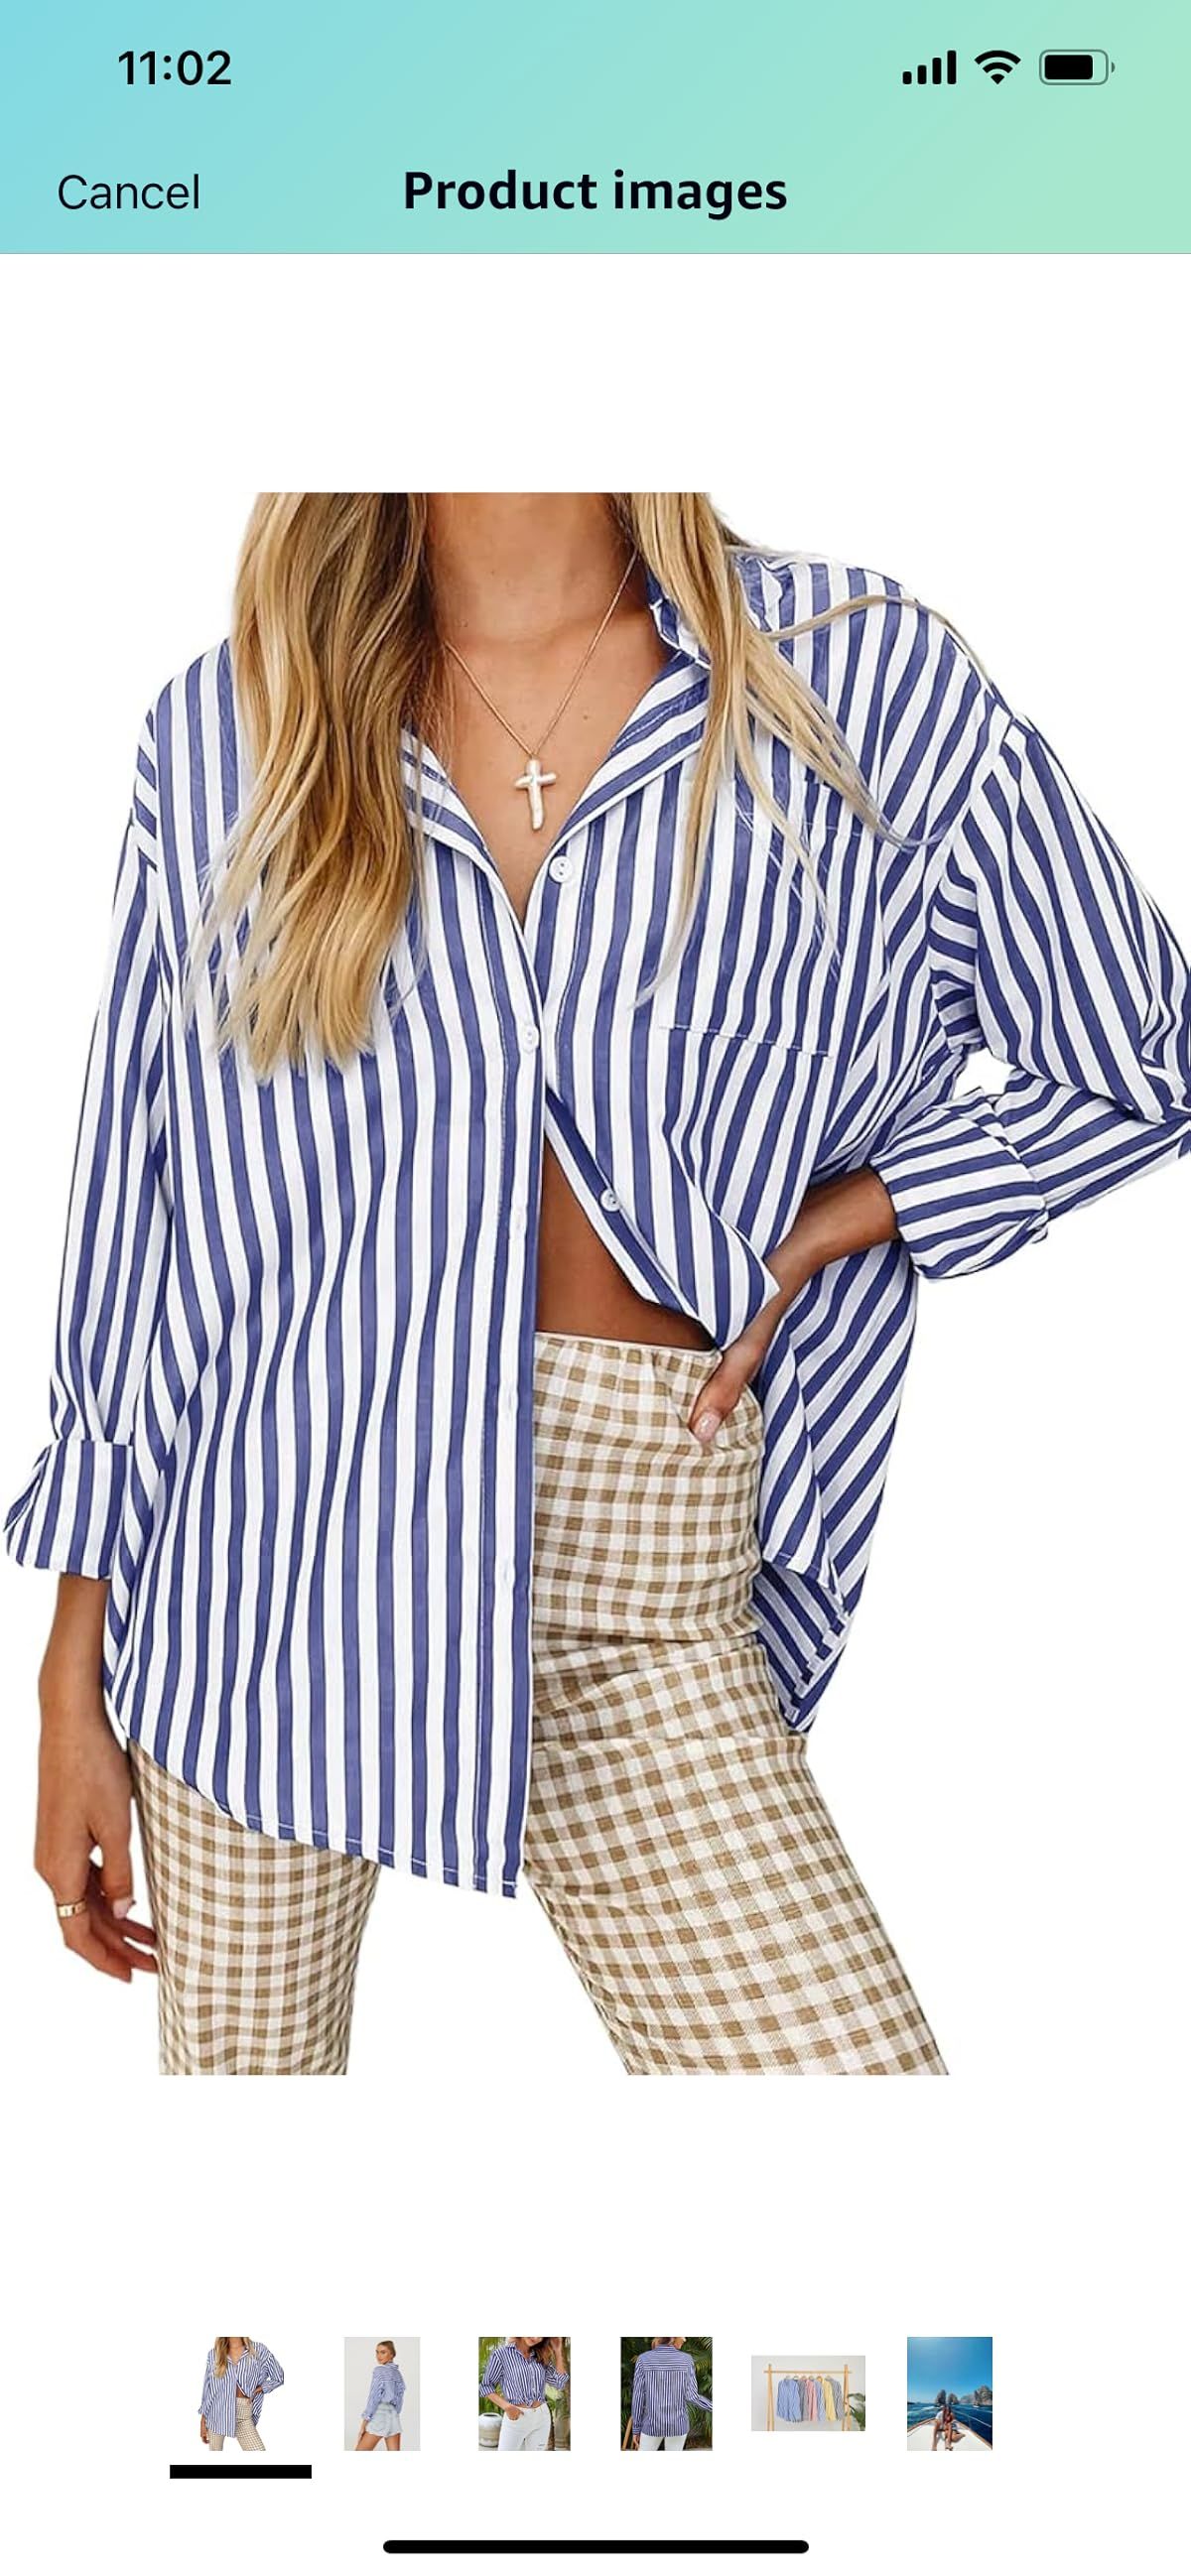 thefabland Women's Blouses Striped Long Sleeve Shirts Button Down Loose Fit Casual Tops | Amazon (US)